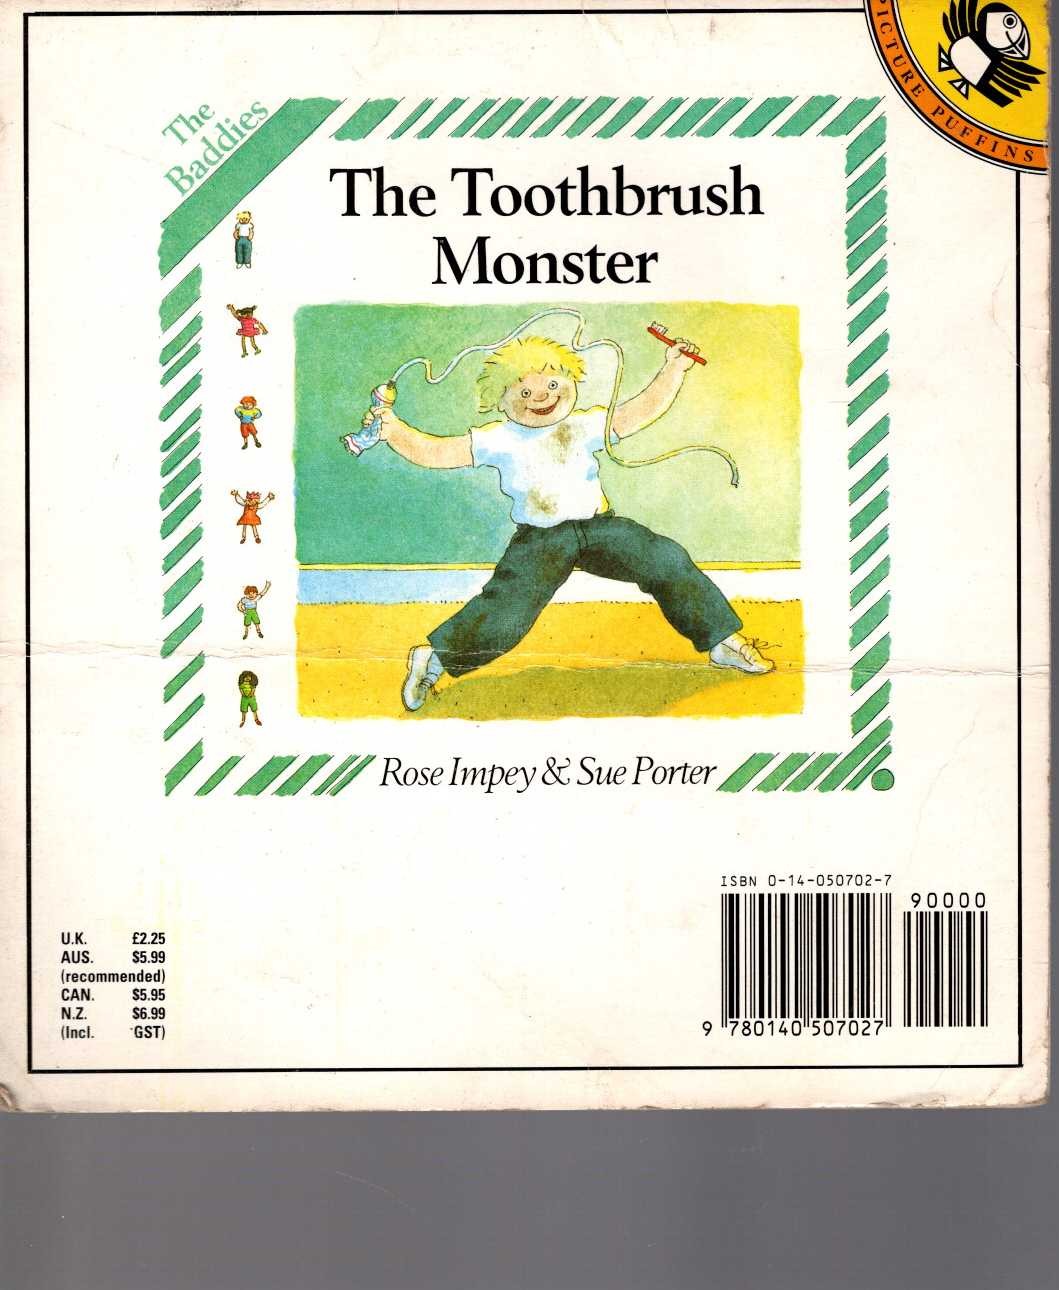 THE TOOTHBRUSH MONSTER magnified rear book cover image